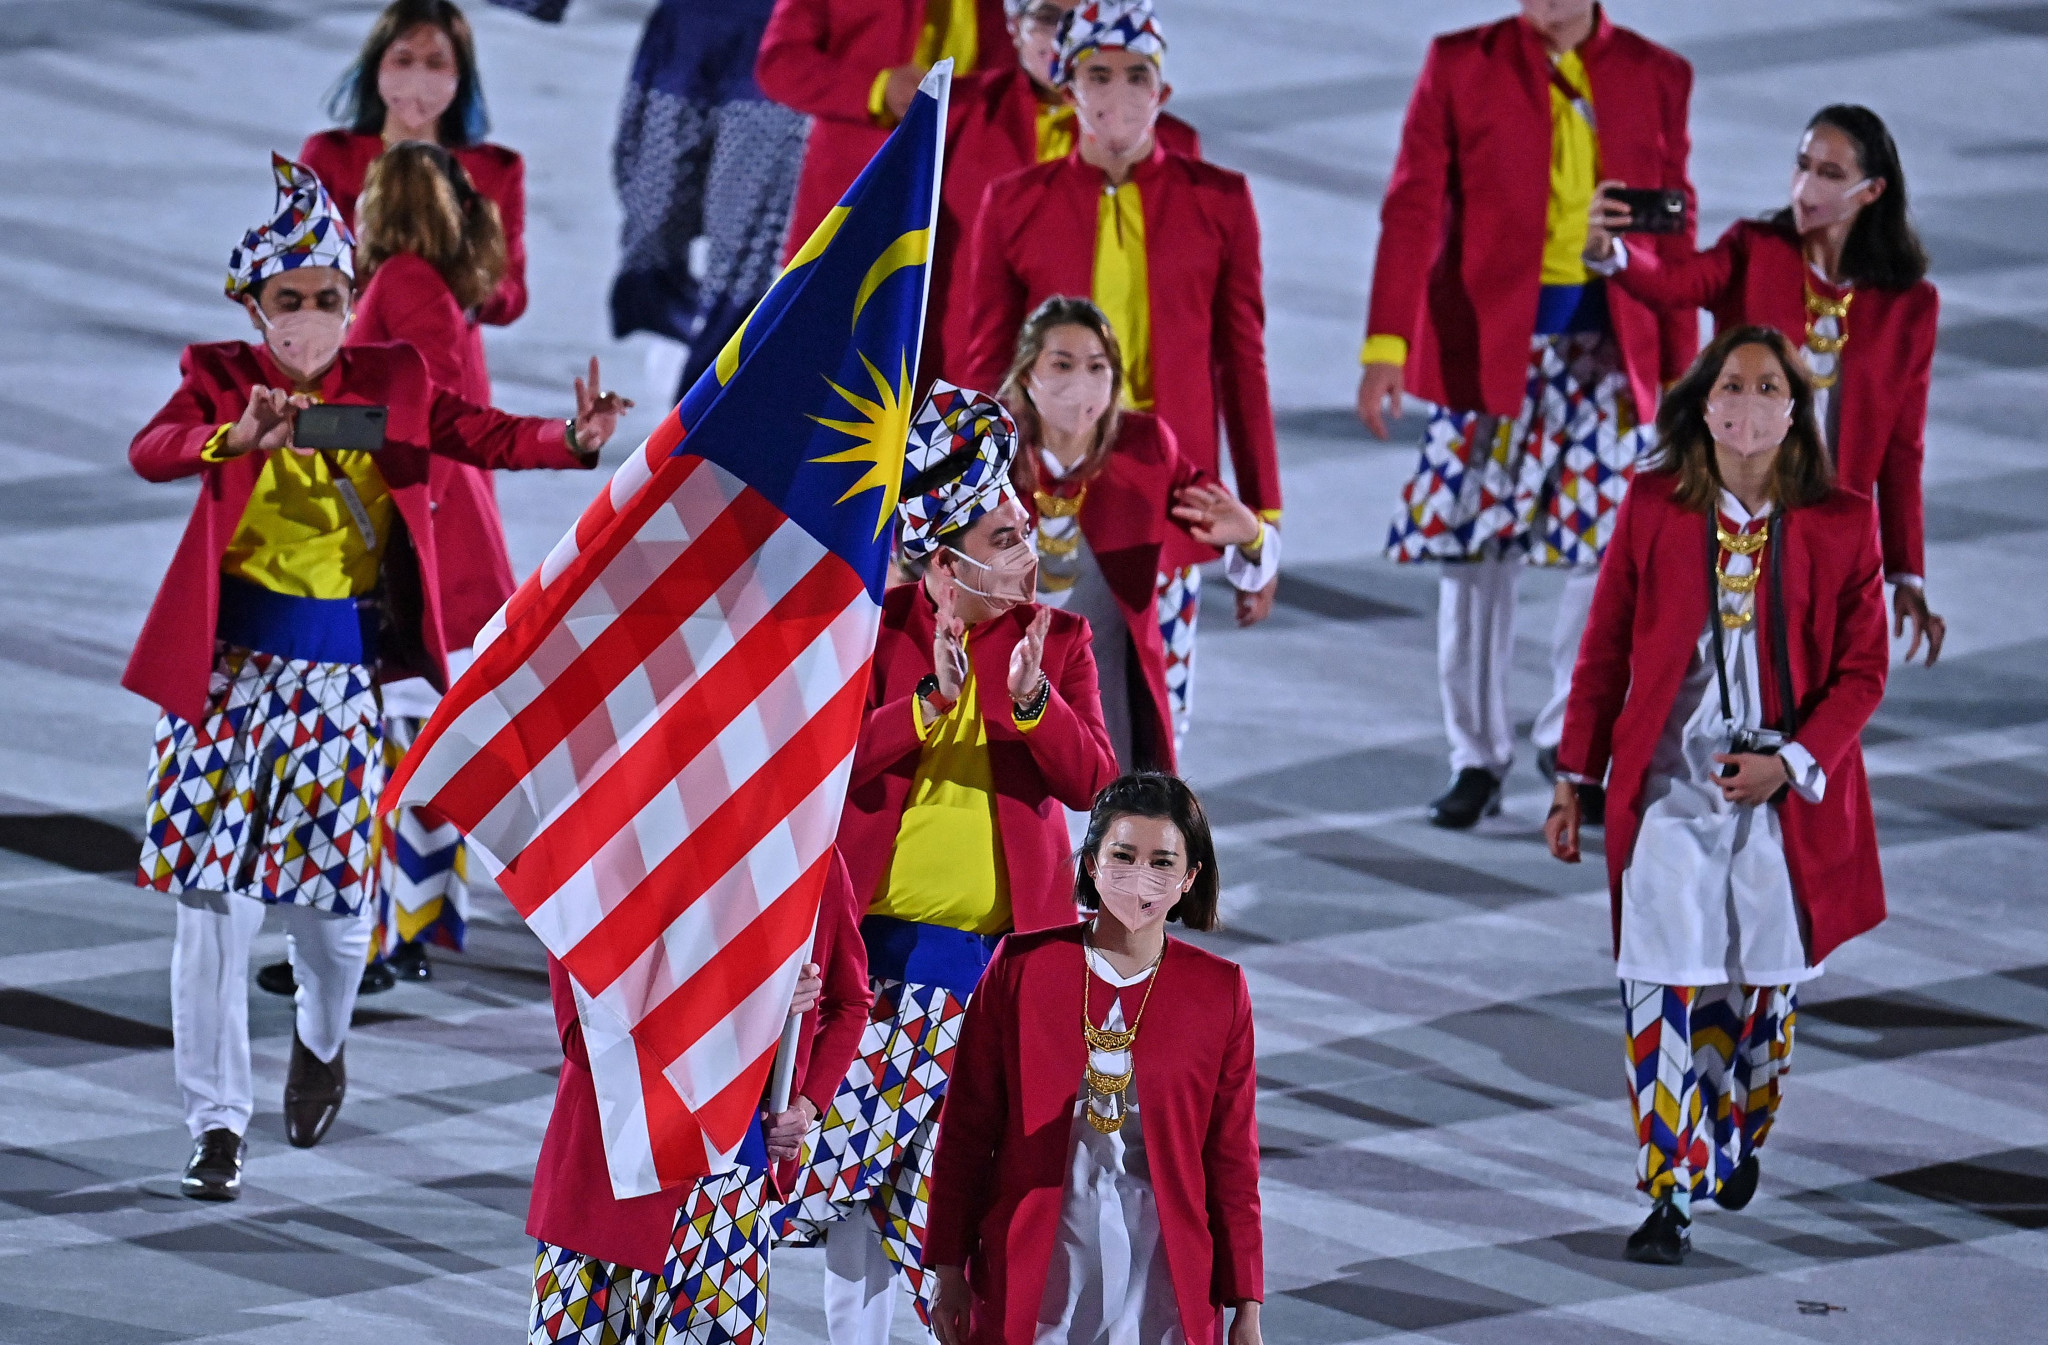 Malaysia's Road to Gold programme will be "intensified" in a bid for the country's first Olympic gold medal at Paris 2024 or Los Angeles 2028 ©Getty Images